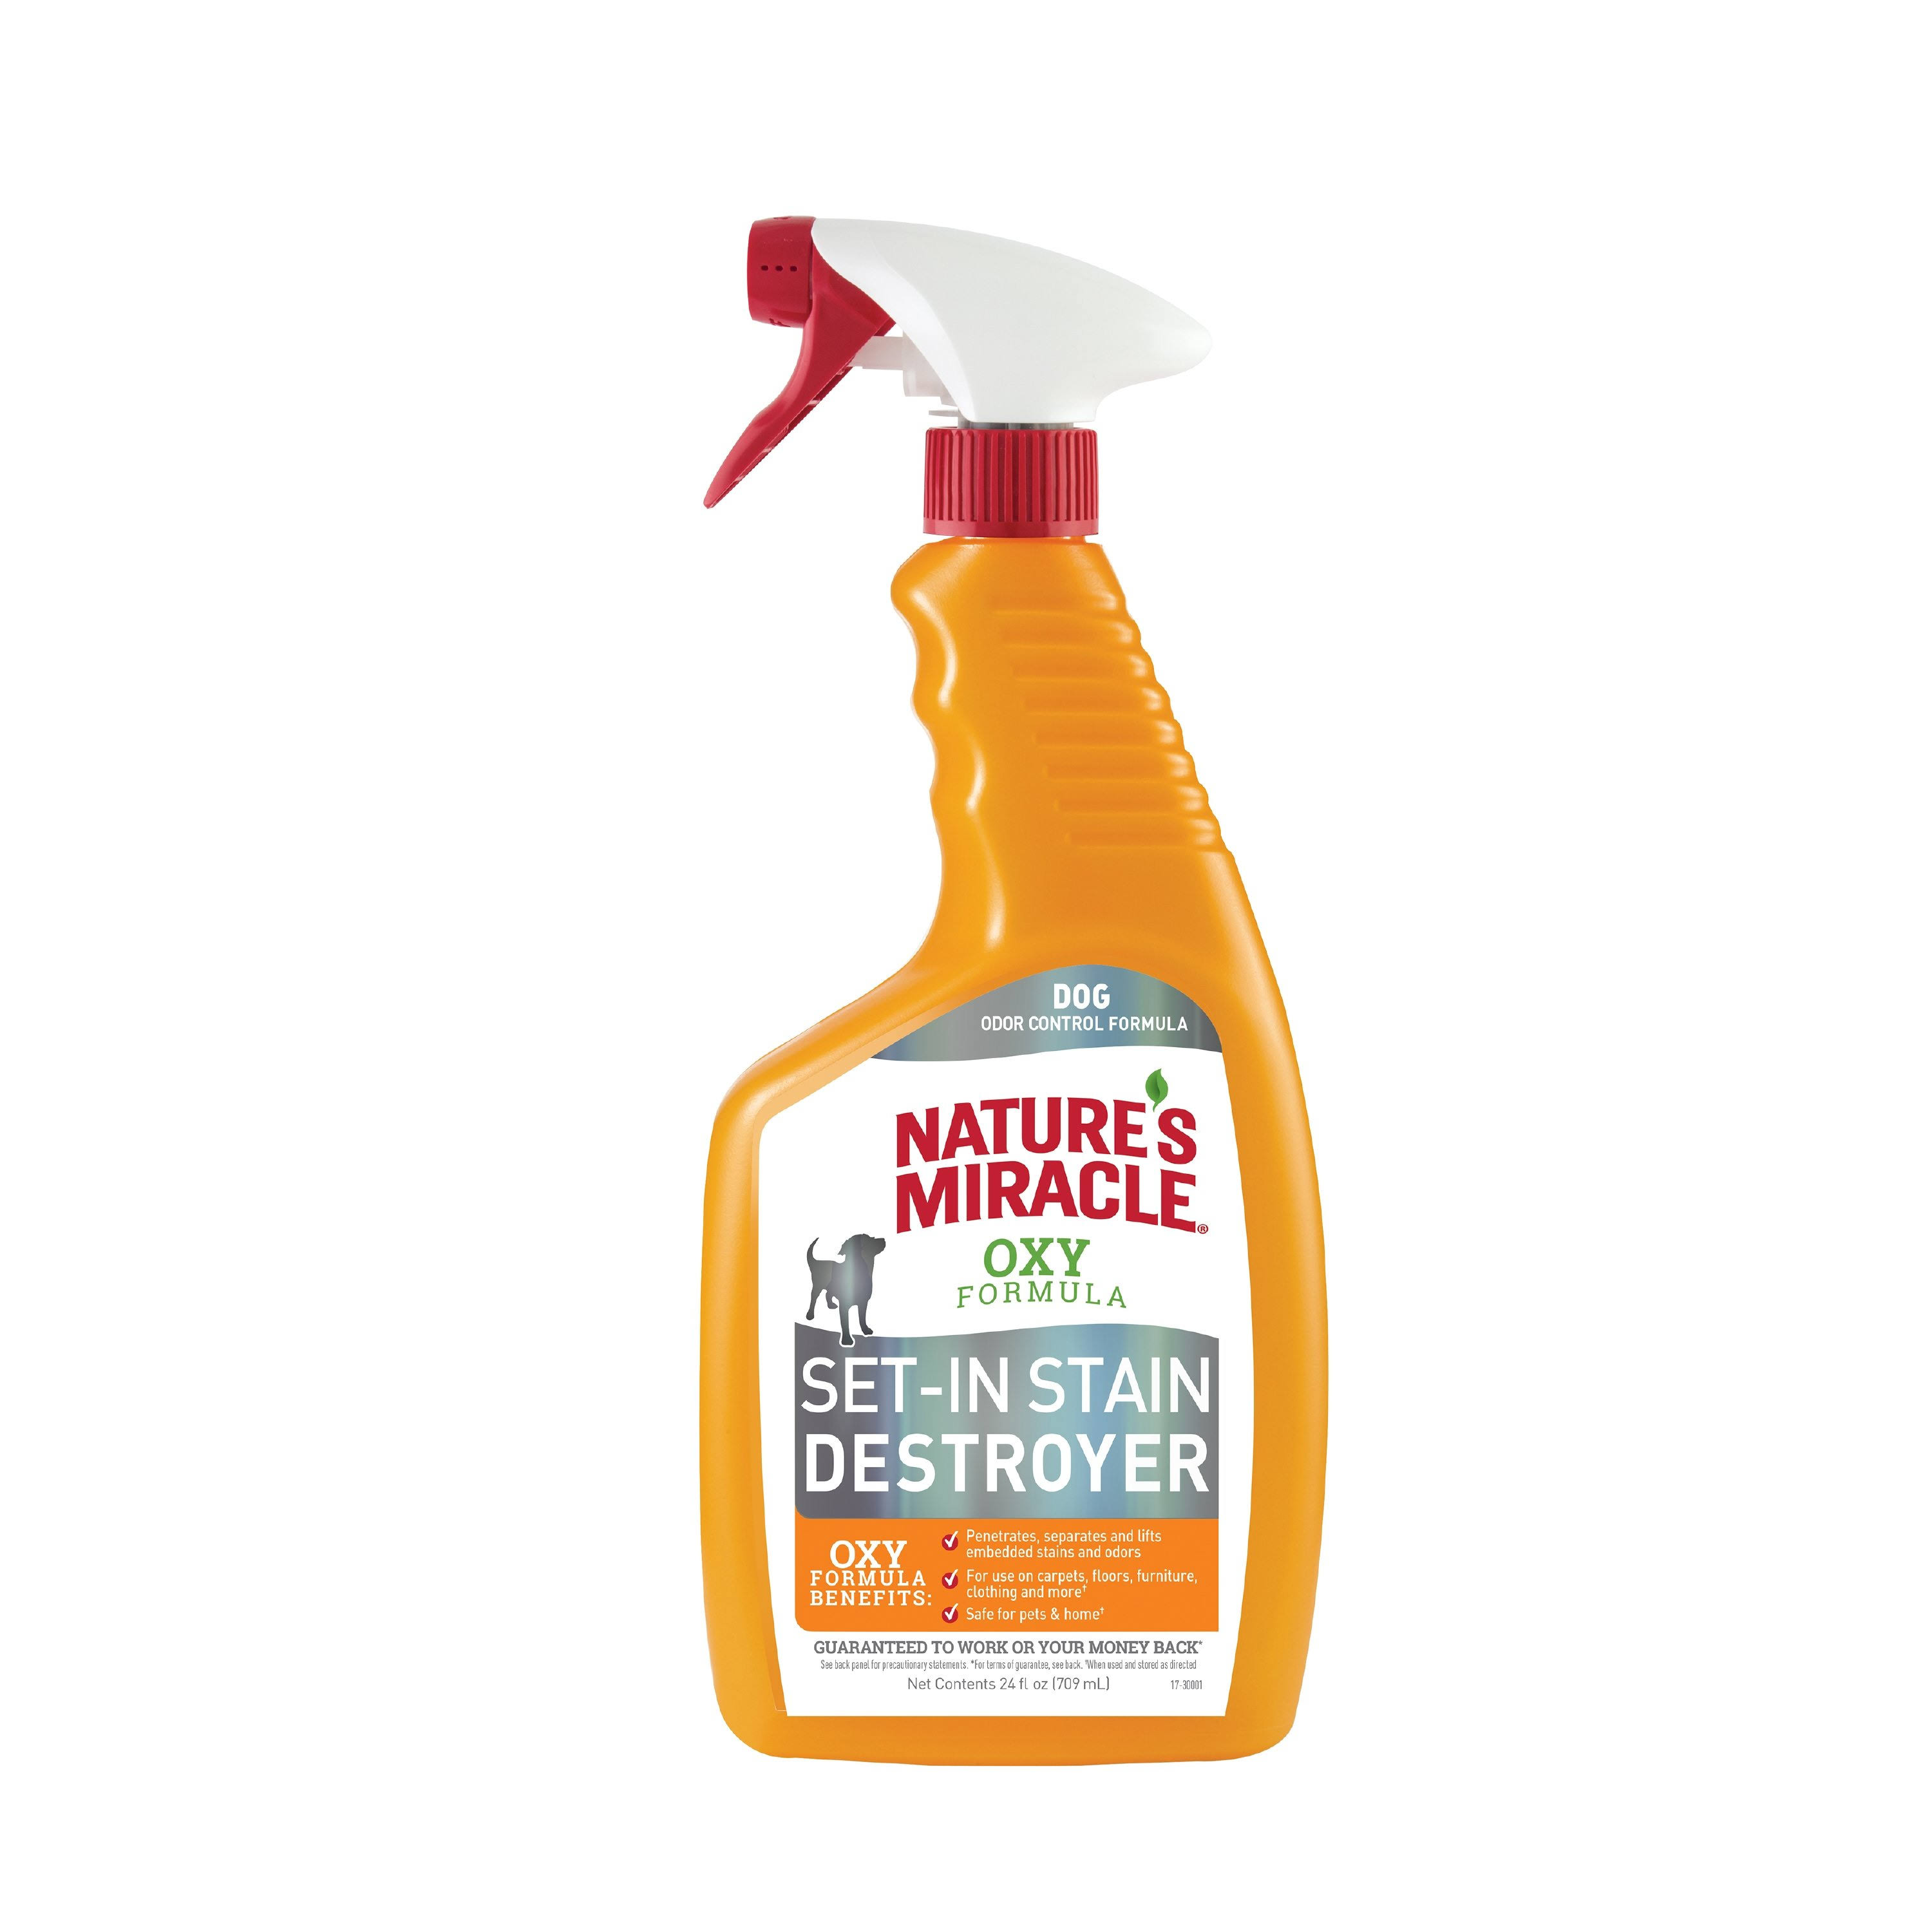 Nature's Miracle Orange-Oxy Stain & Odor Remover 24oz